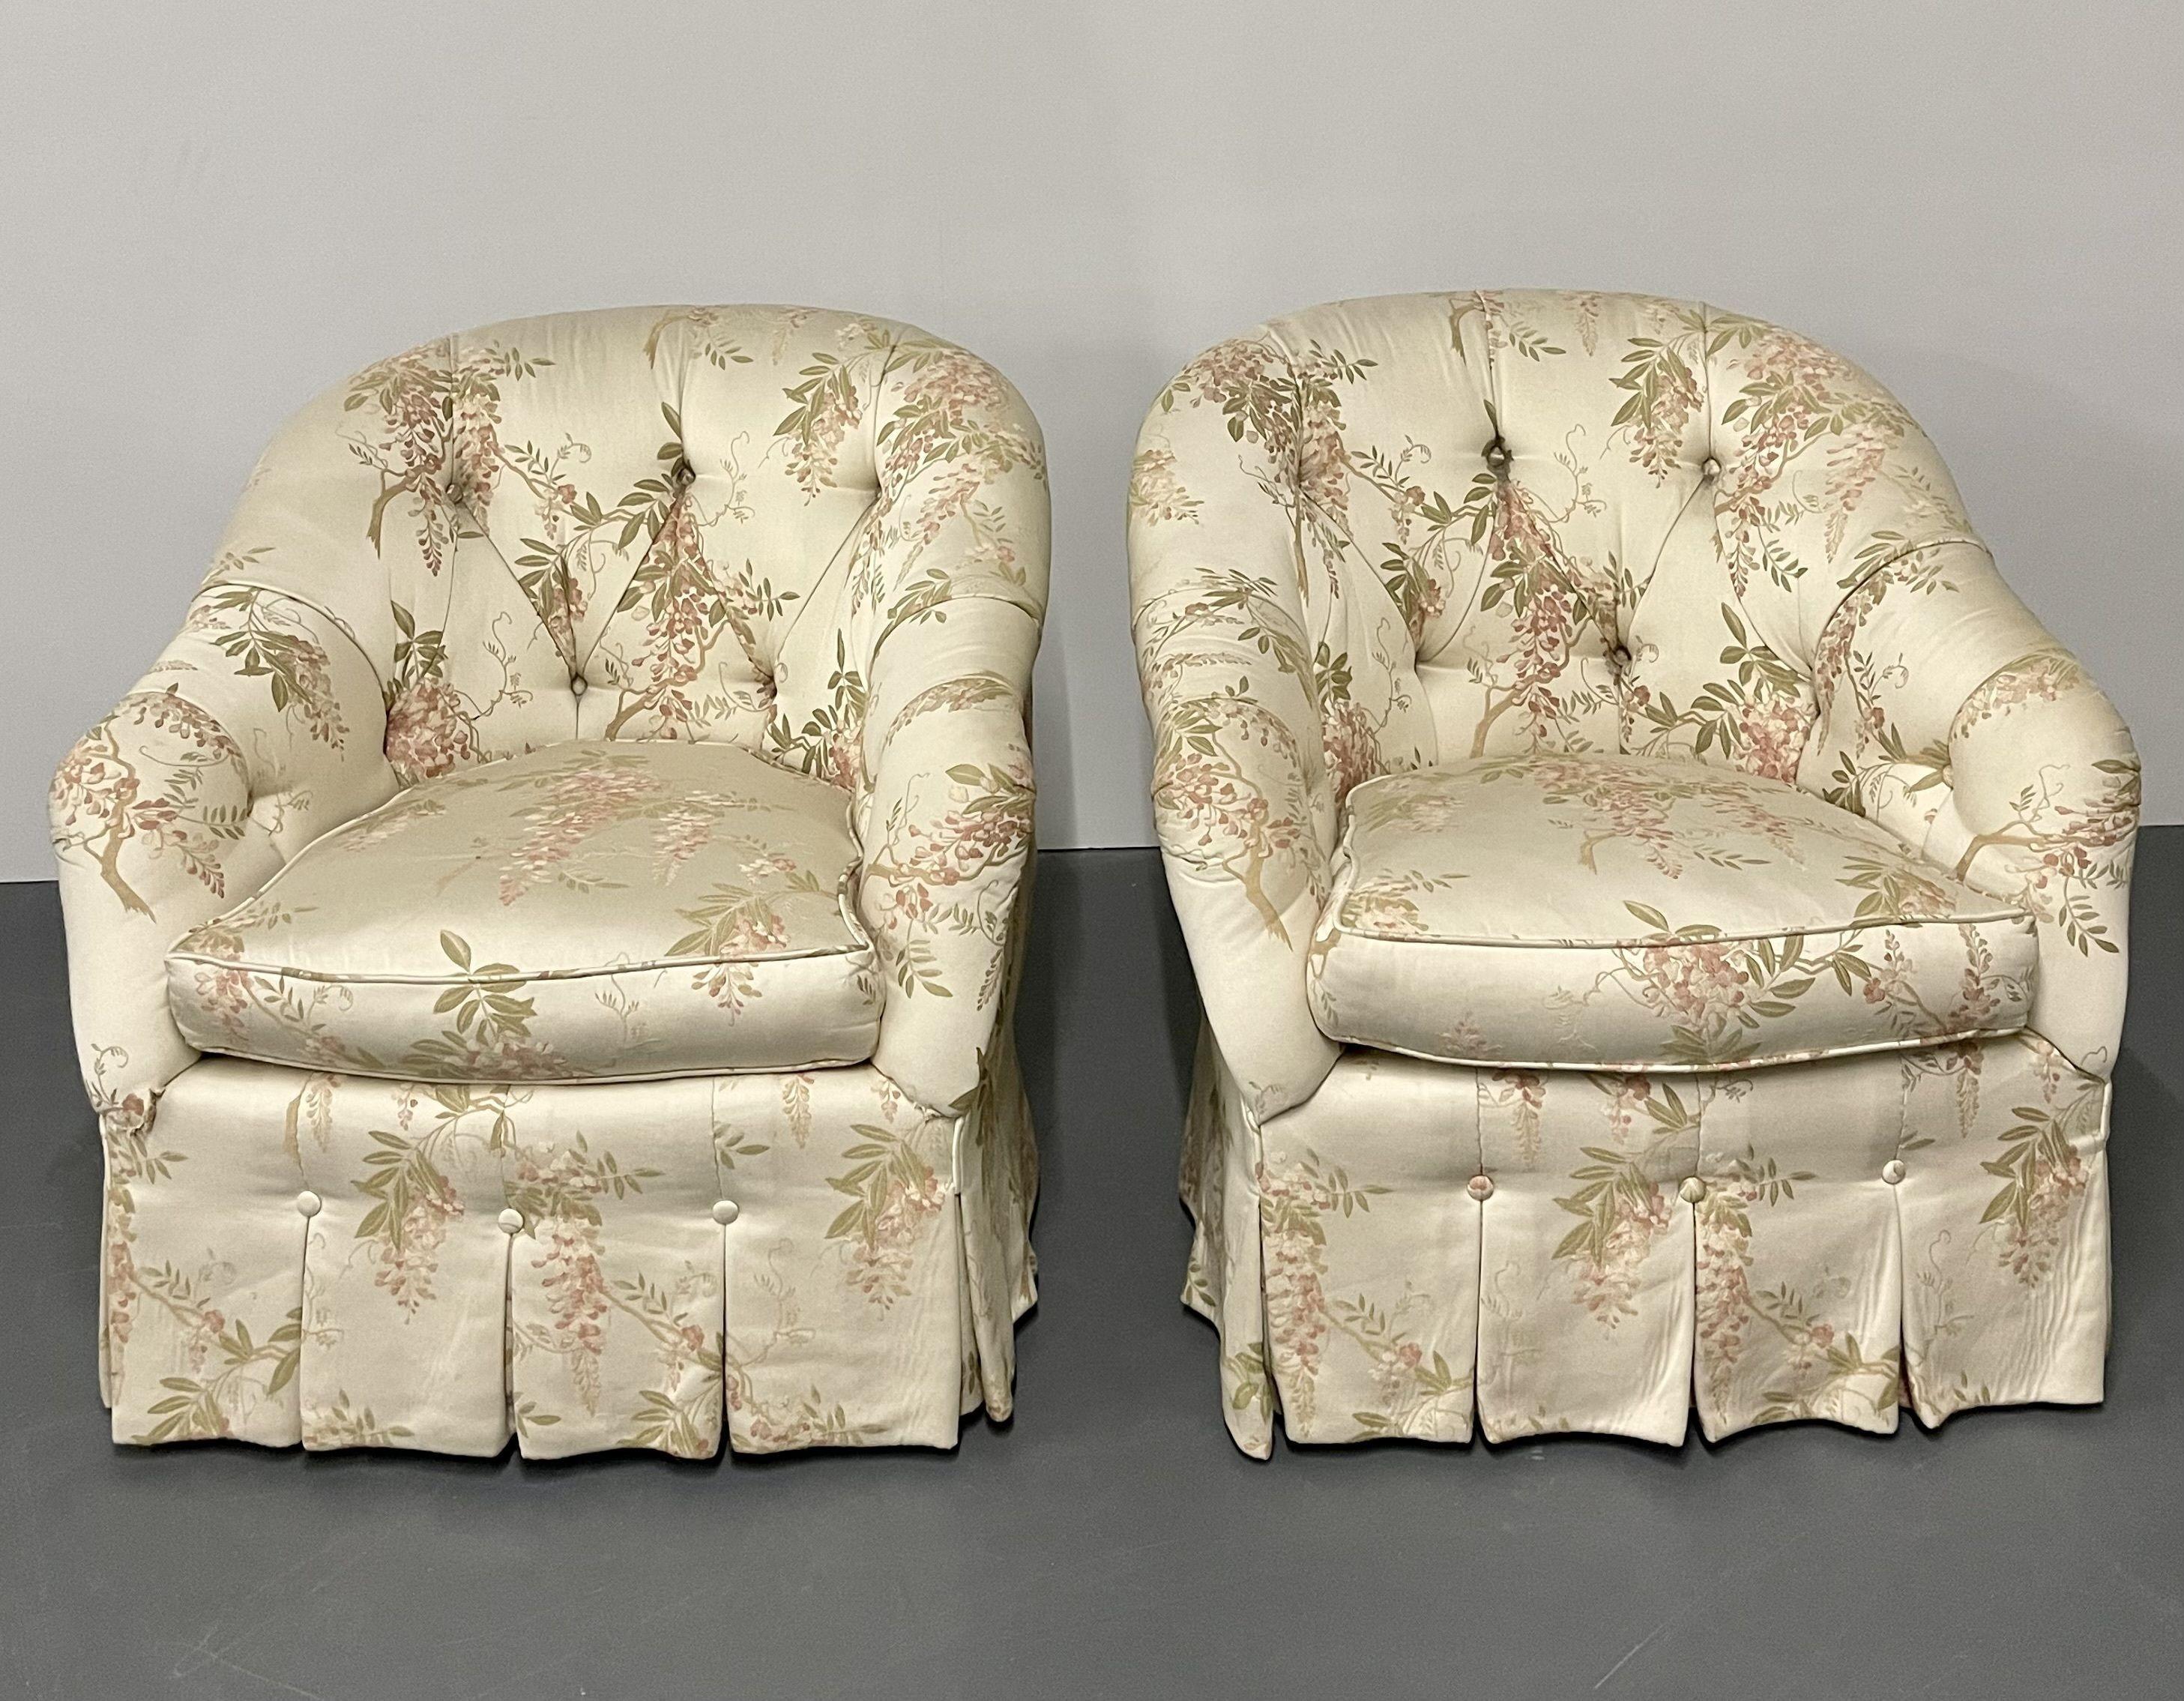 A Pair of Floral Scalamandre Swivel or Lounge Chairs, Milo Baughman. Each on a swivel circular base having an apron covering. The pair with stuffed cushions,

Seat height: 18.5 in.

Removed directly from Dr Shawn Garber's home on the Gold Coast